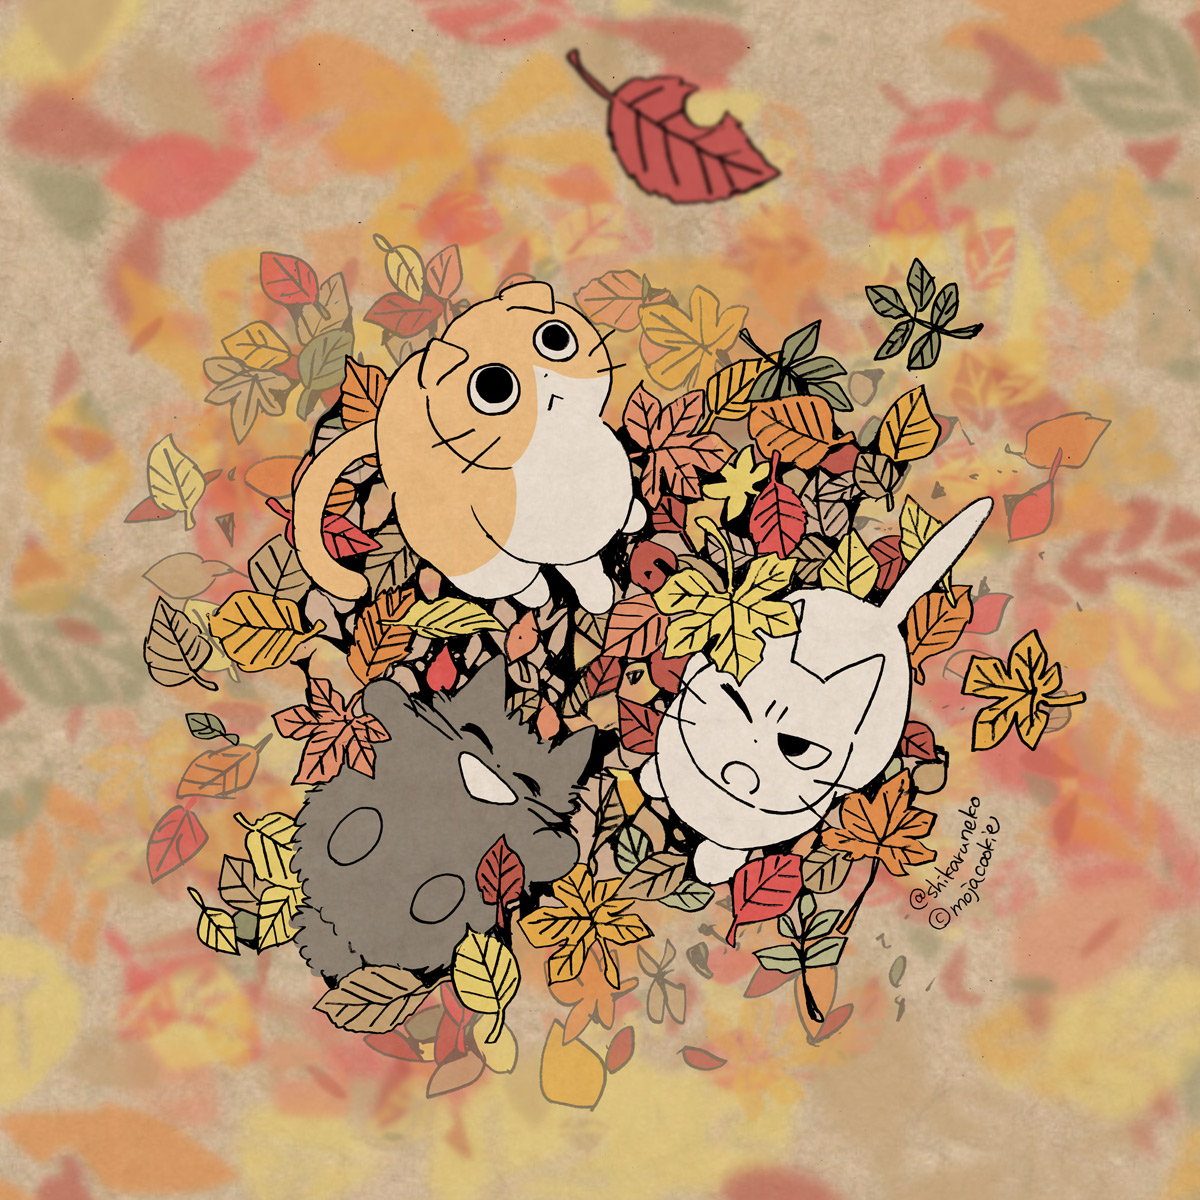 no humans cat leaf animal focus autumn leaves closed eyes open mouth  illustration images